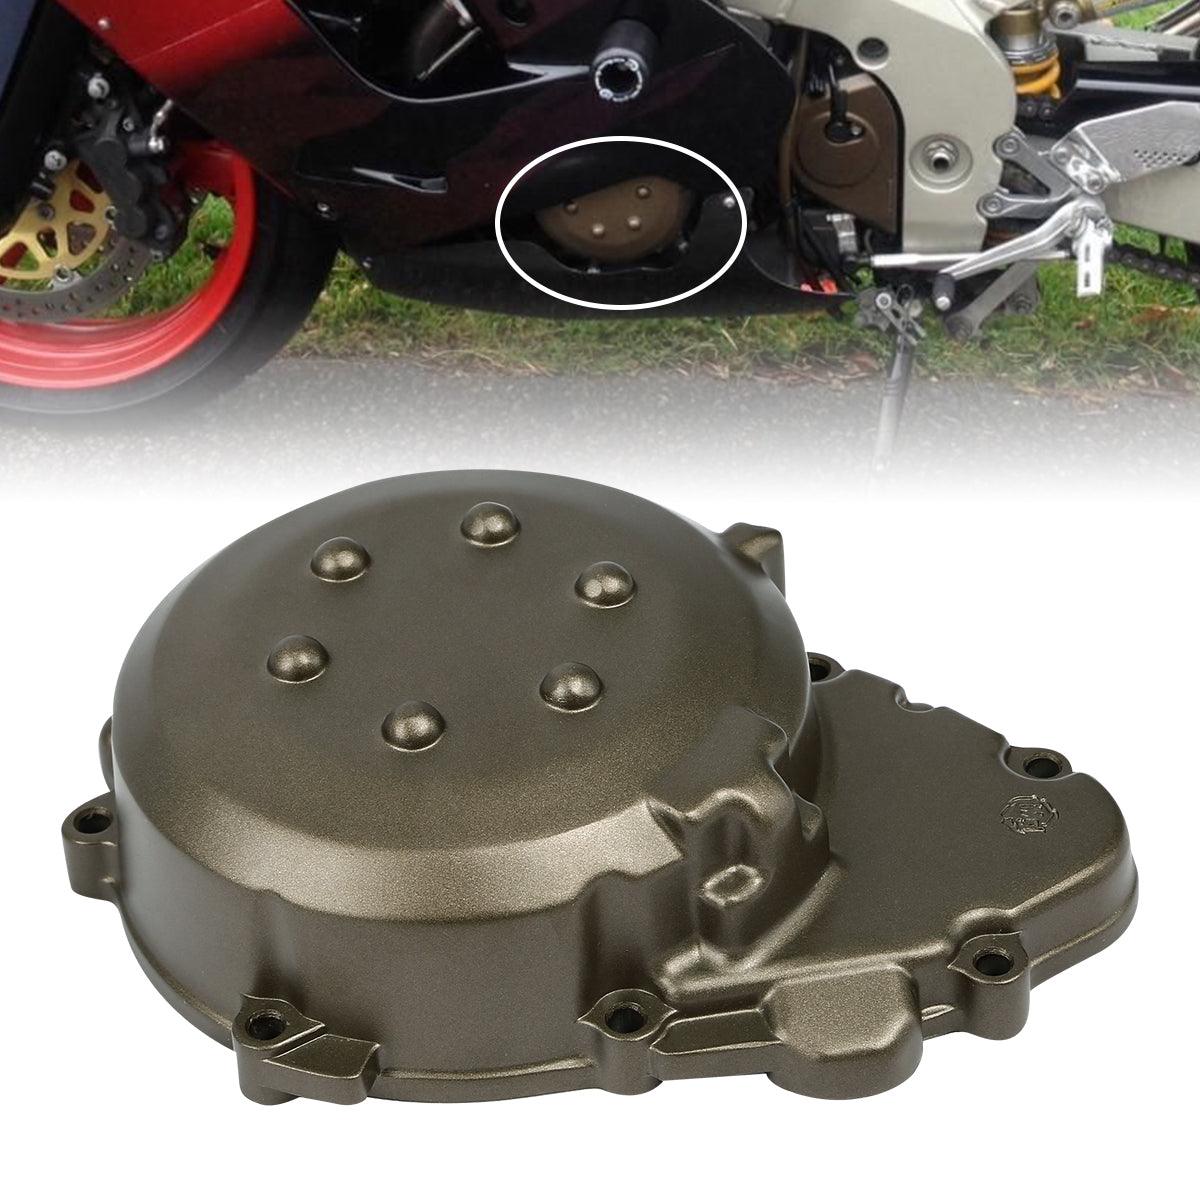 TCMT Left Engine Stator Crankcase Cover Fit For Kawasaki Ninja ZX9R ZX-9R  '98-'03